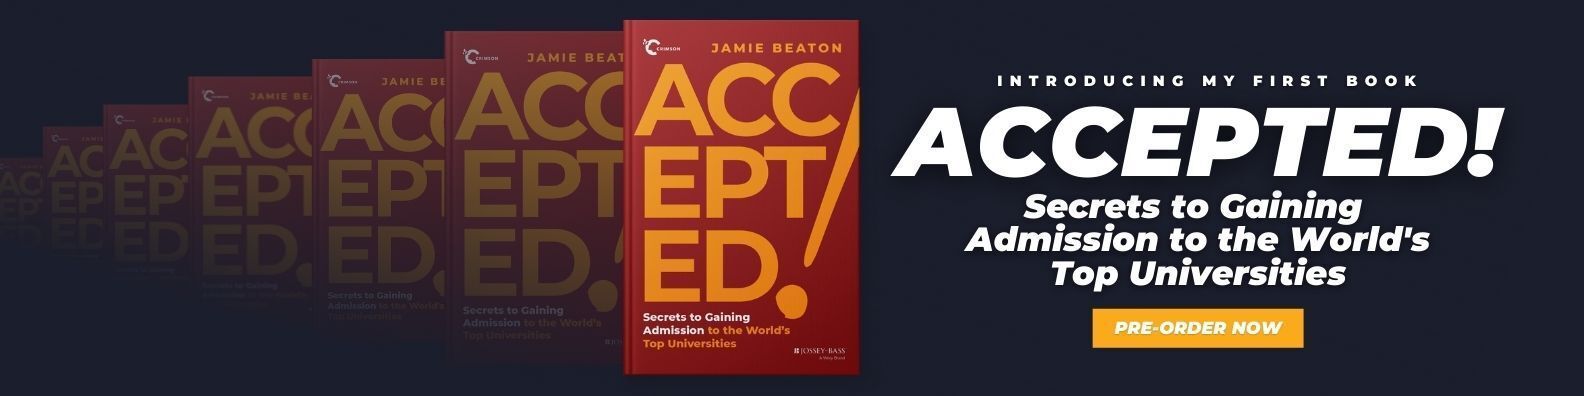 ACCEPTED! Secrets to Gaining Admission To The World's Top Universities